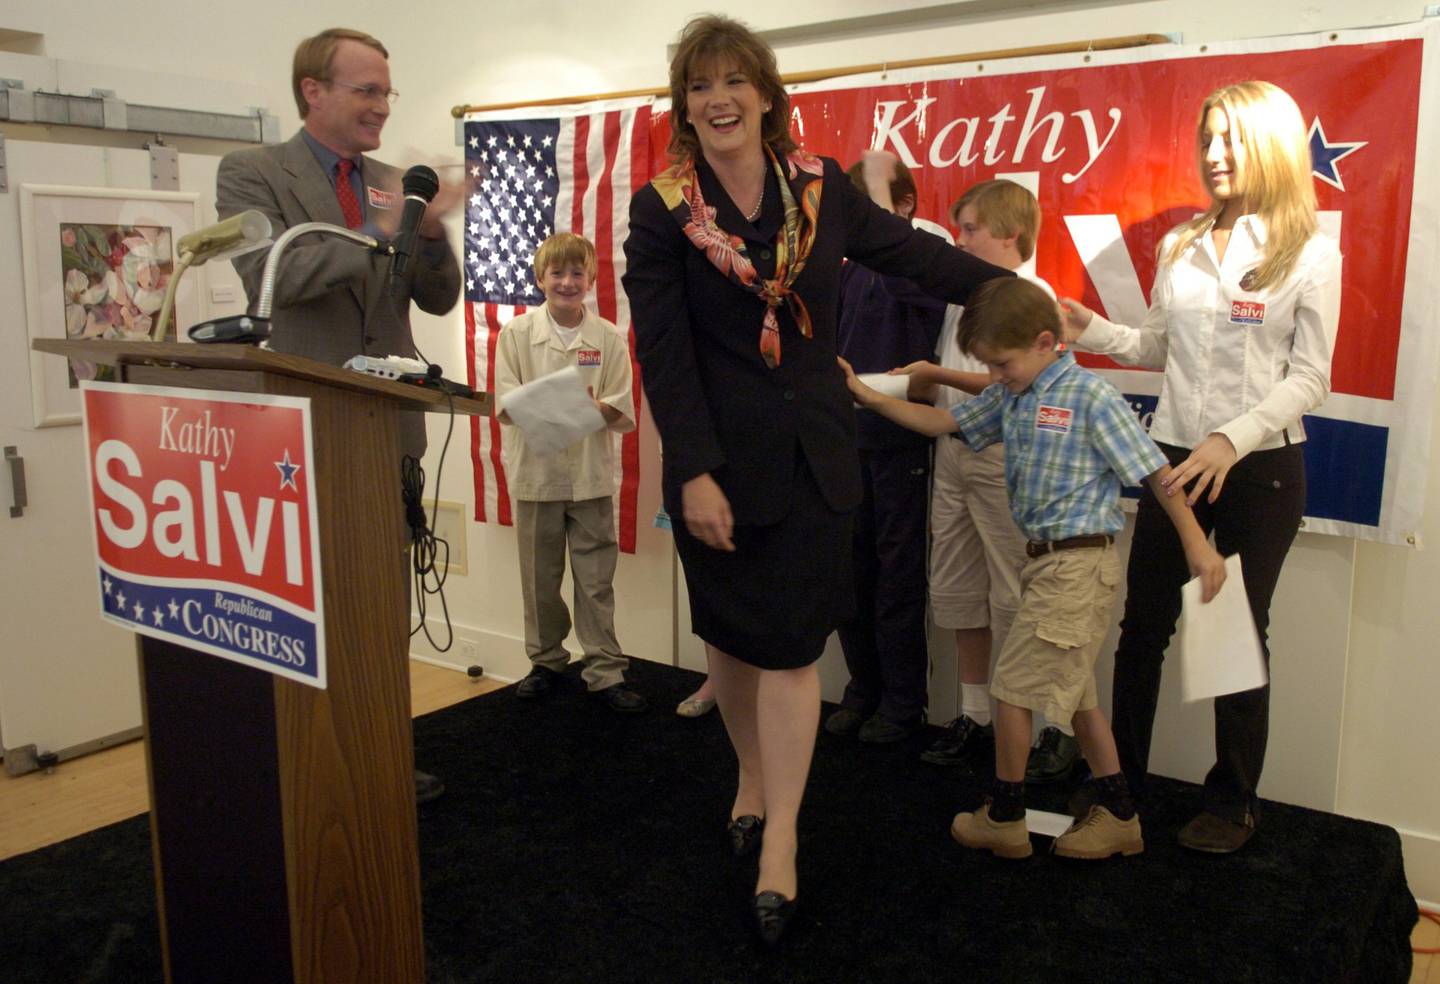 Kathy Salvi announces her candidacy for the Republican nomination for the 18th Congressional District at the Discovery Museum in Wauconda on Sept. 13, 2005. Salvi's husband Al is at left.  